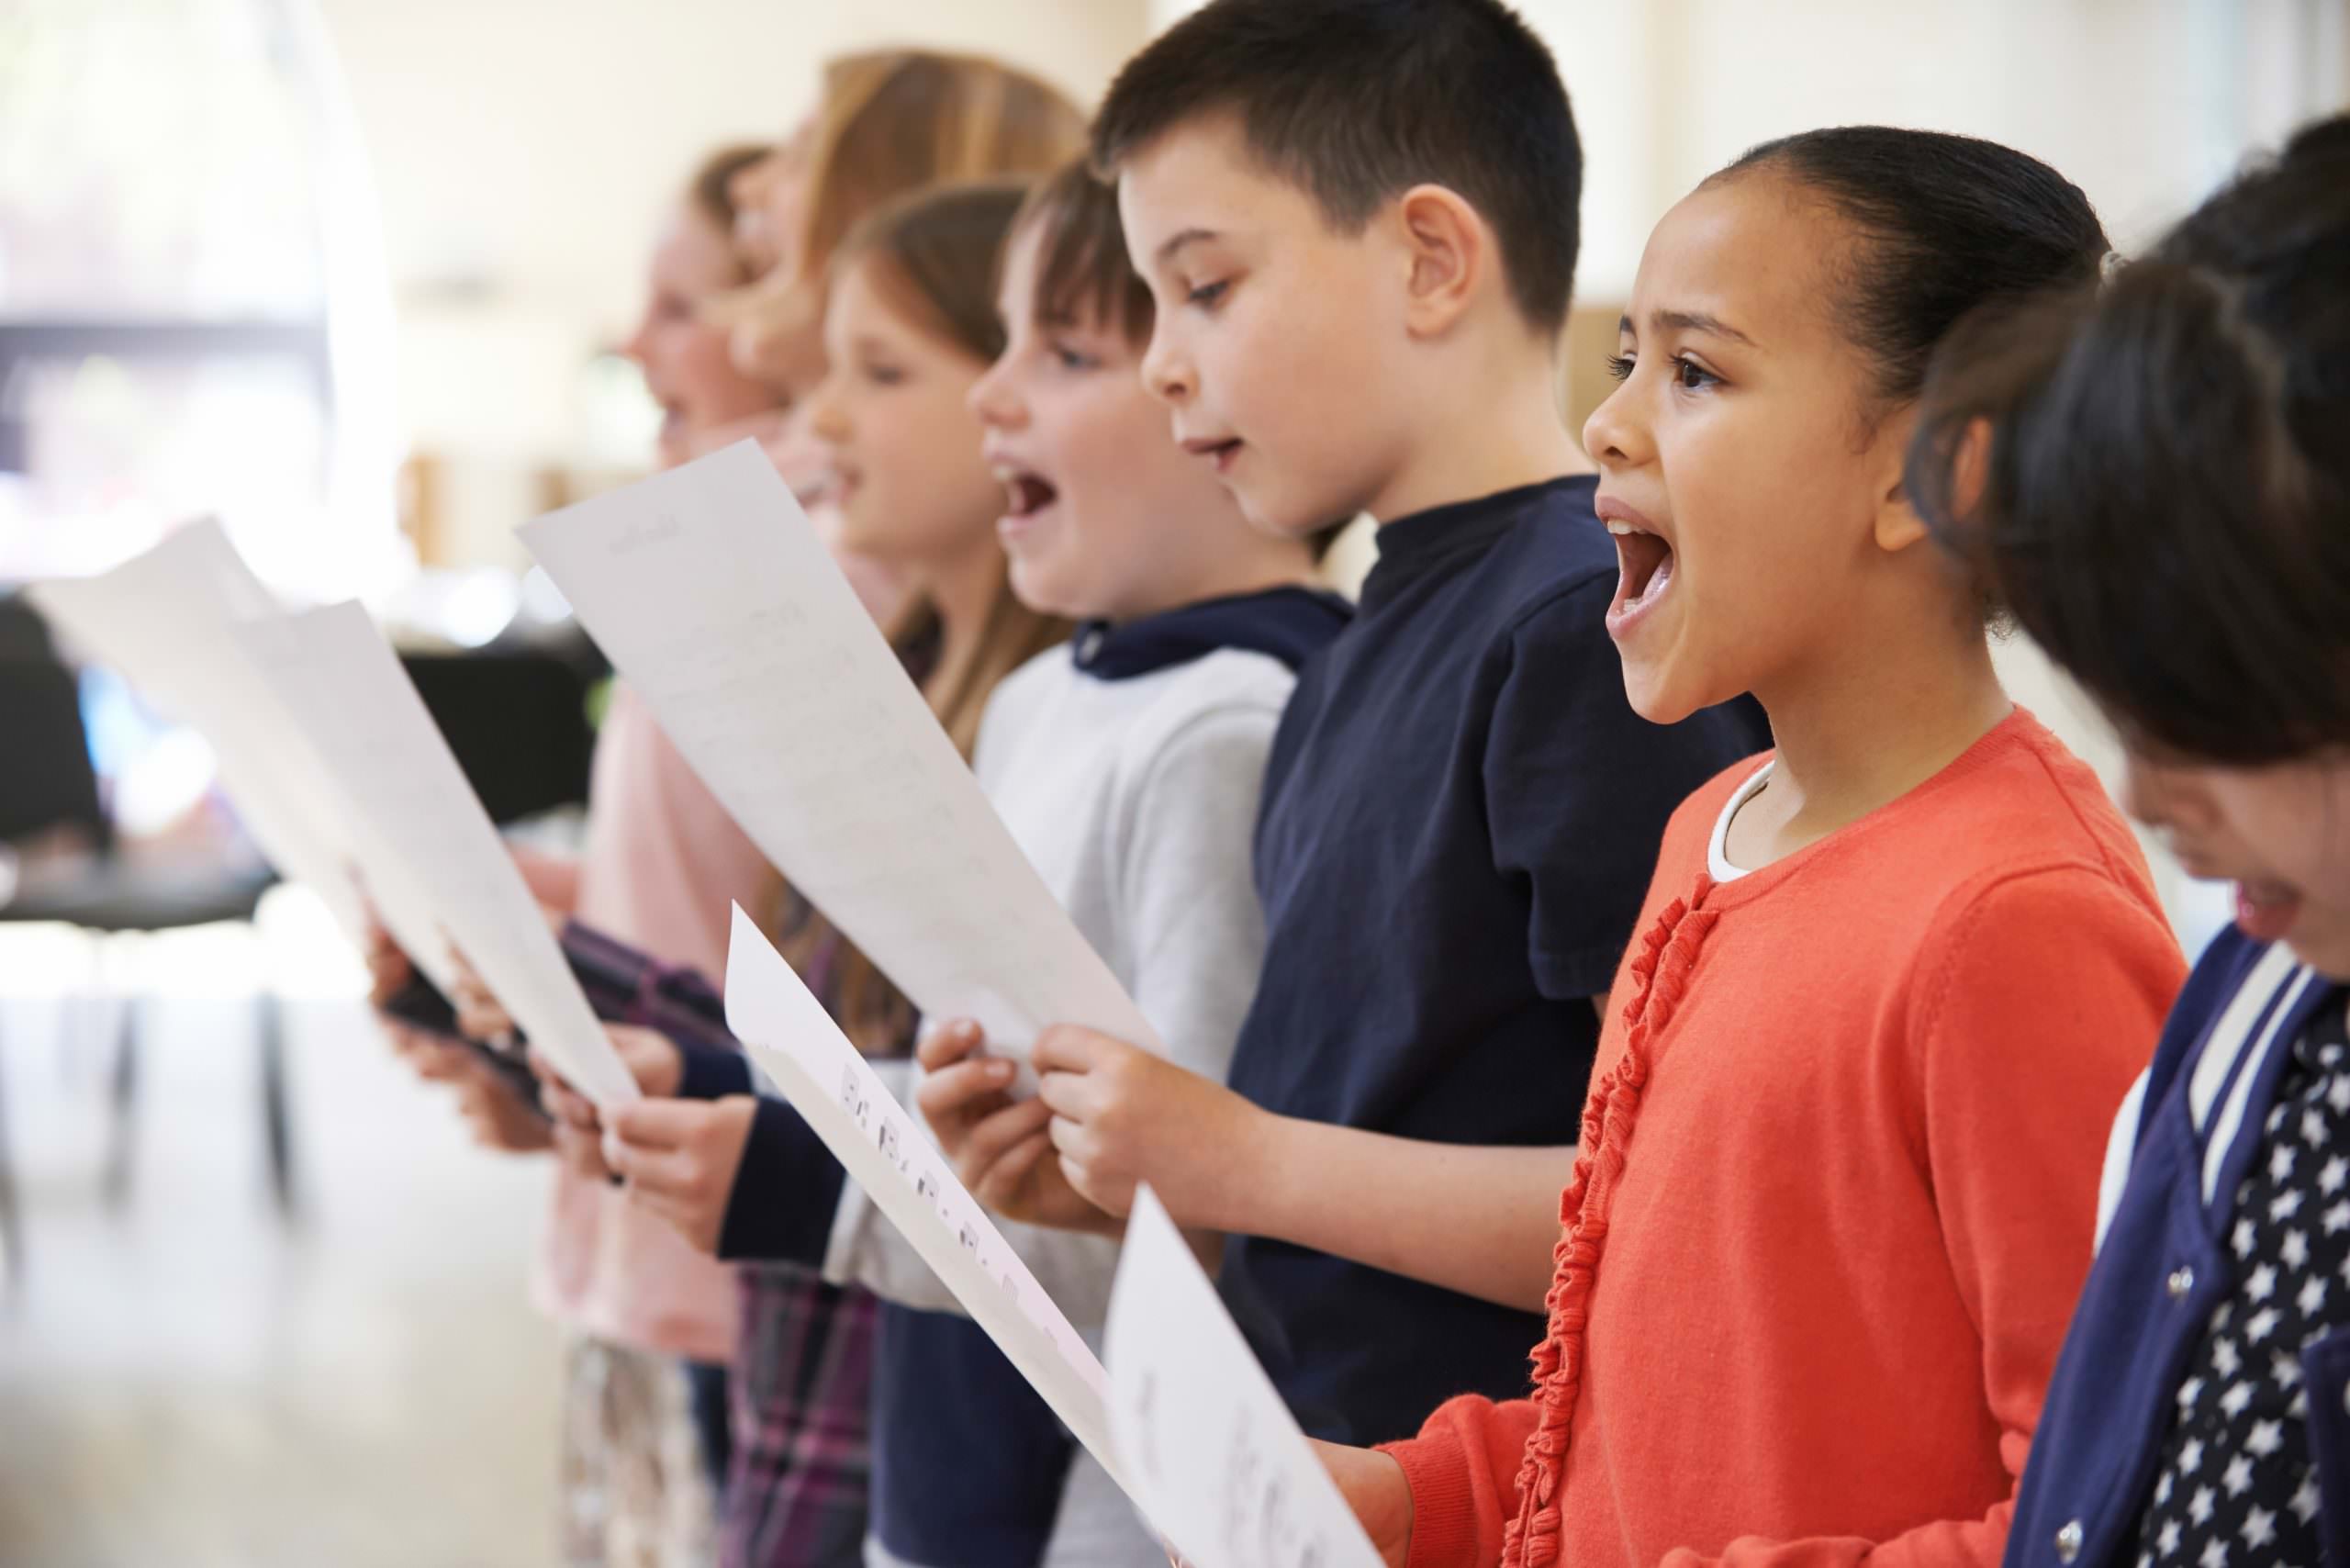 Unleash Your Inner Star! Join the Glee Club Singing Sessions – FREE Event for Teens at Cynon Valley Museum!